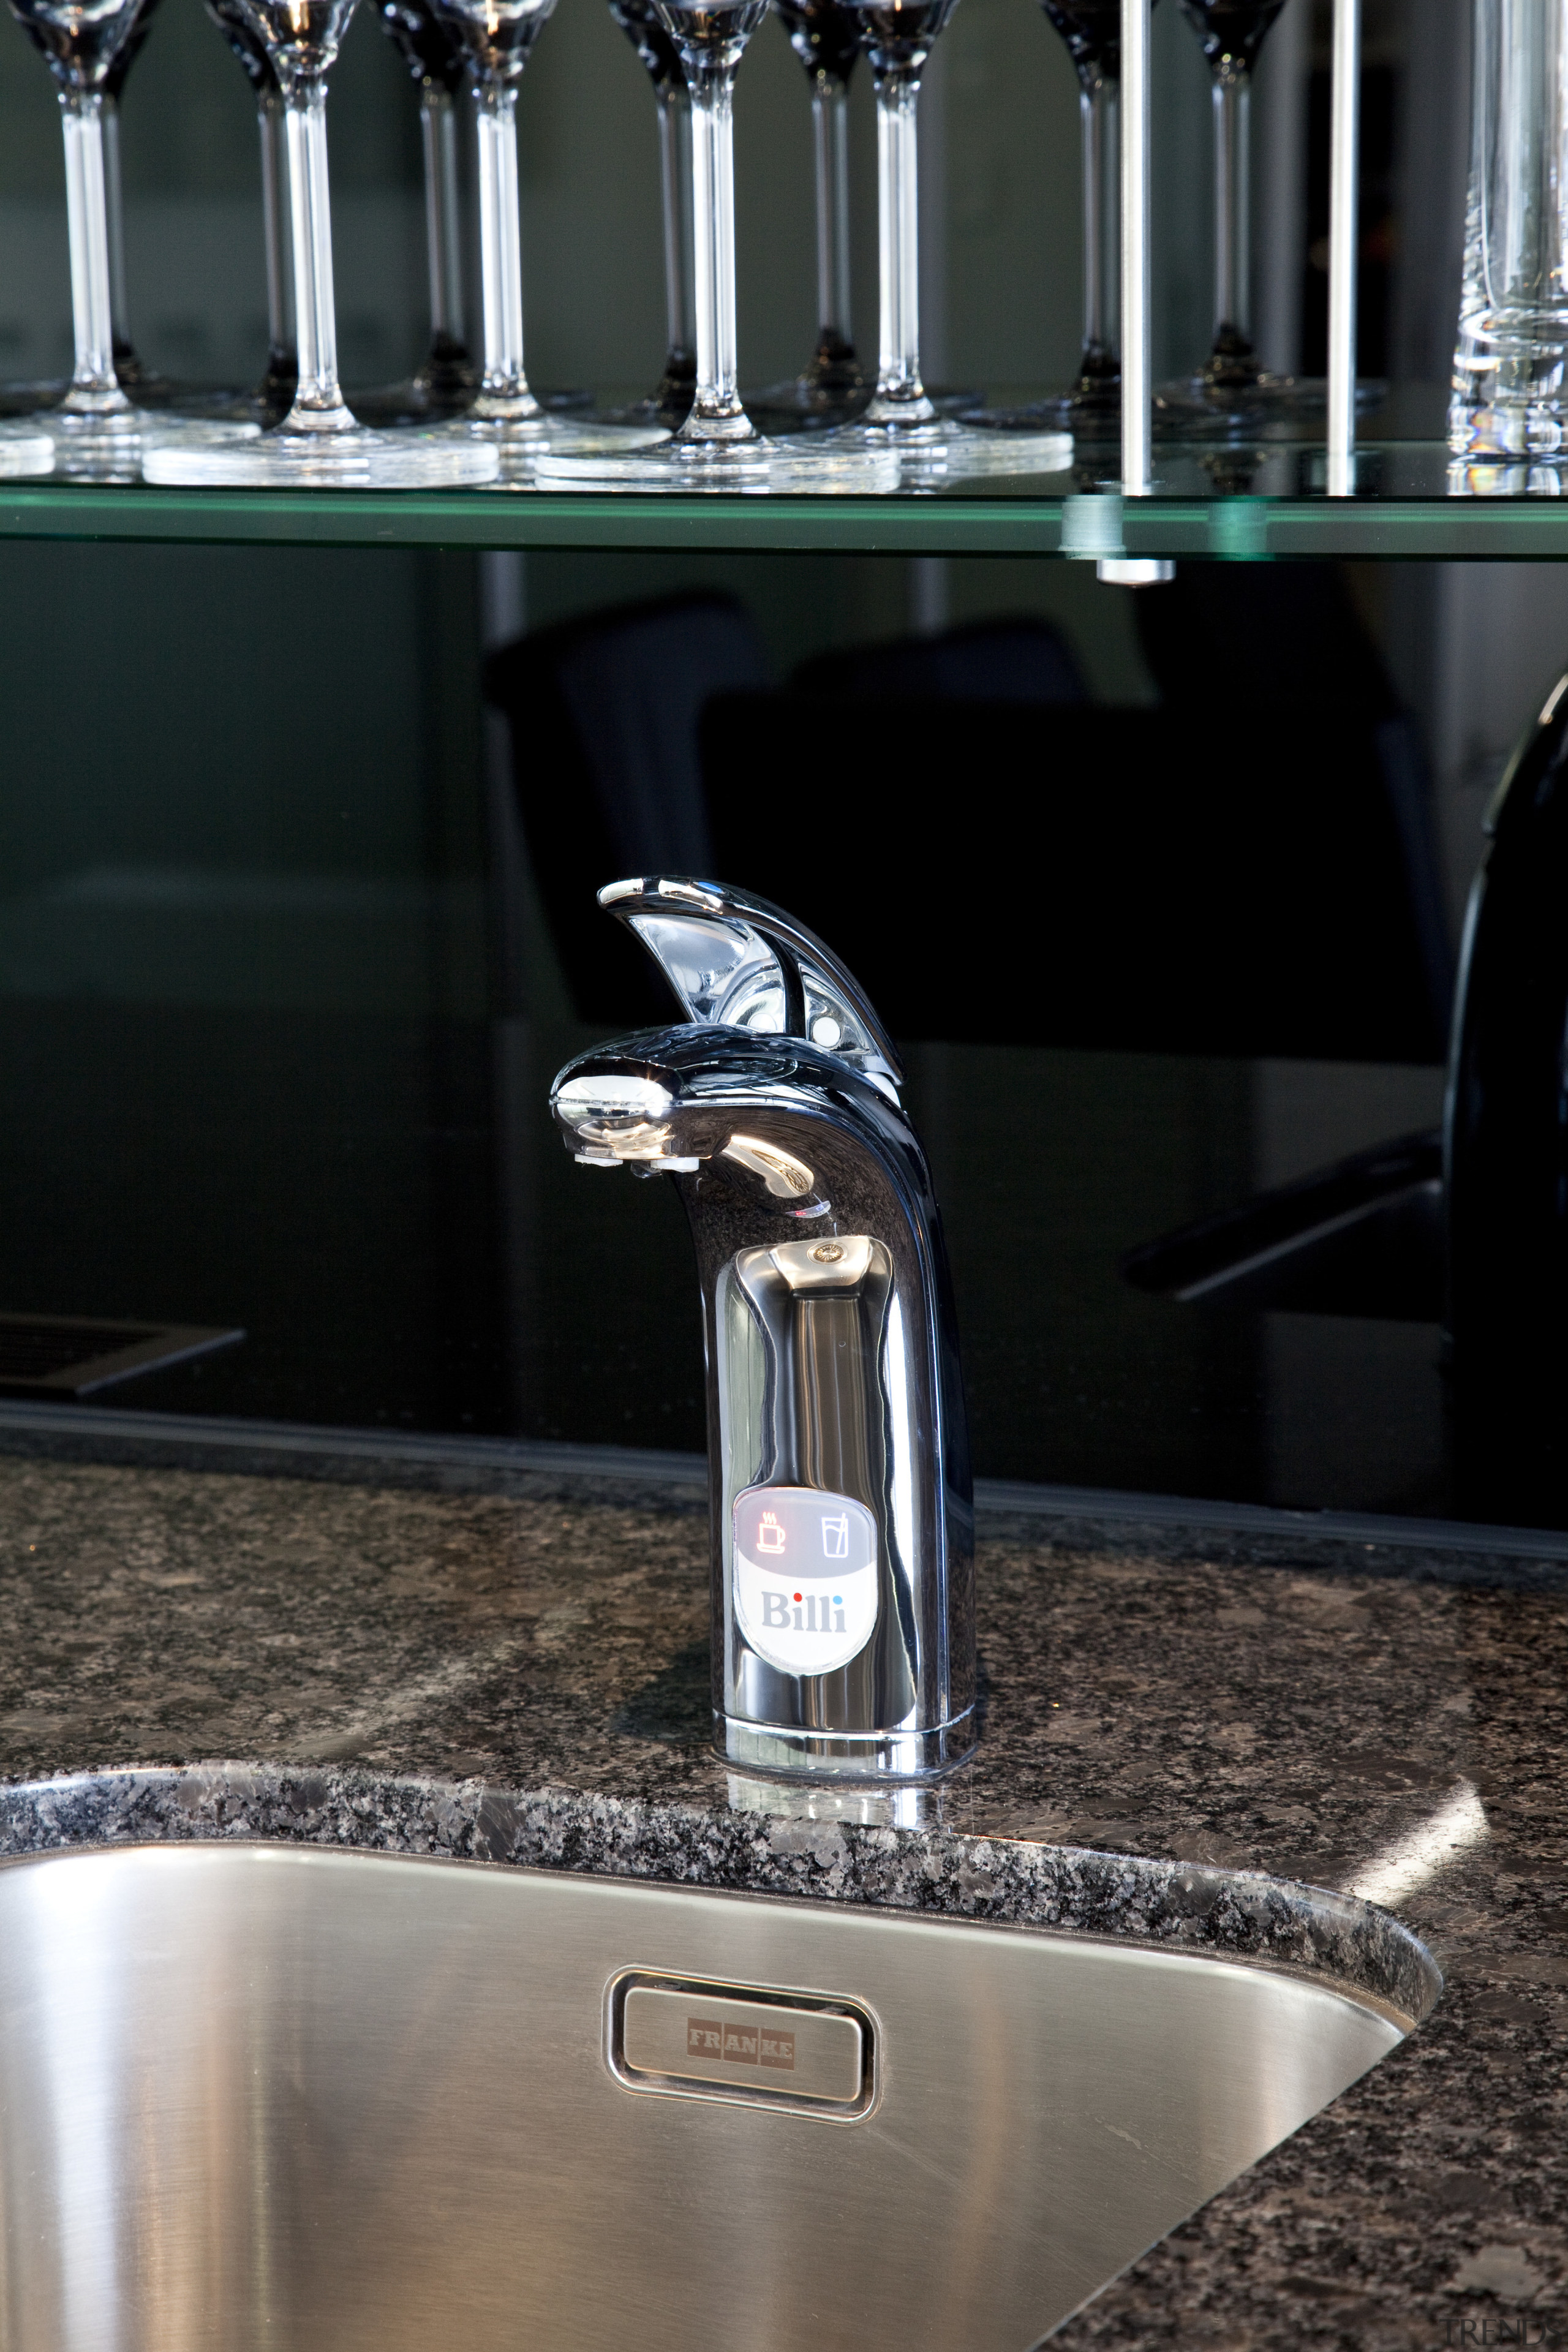 Seen here is a drinking-water system designed by countertop, glass, tap, water, black